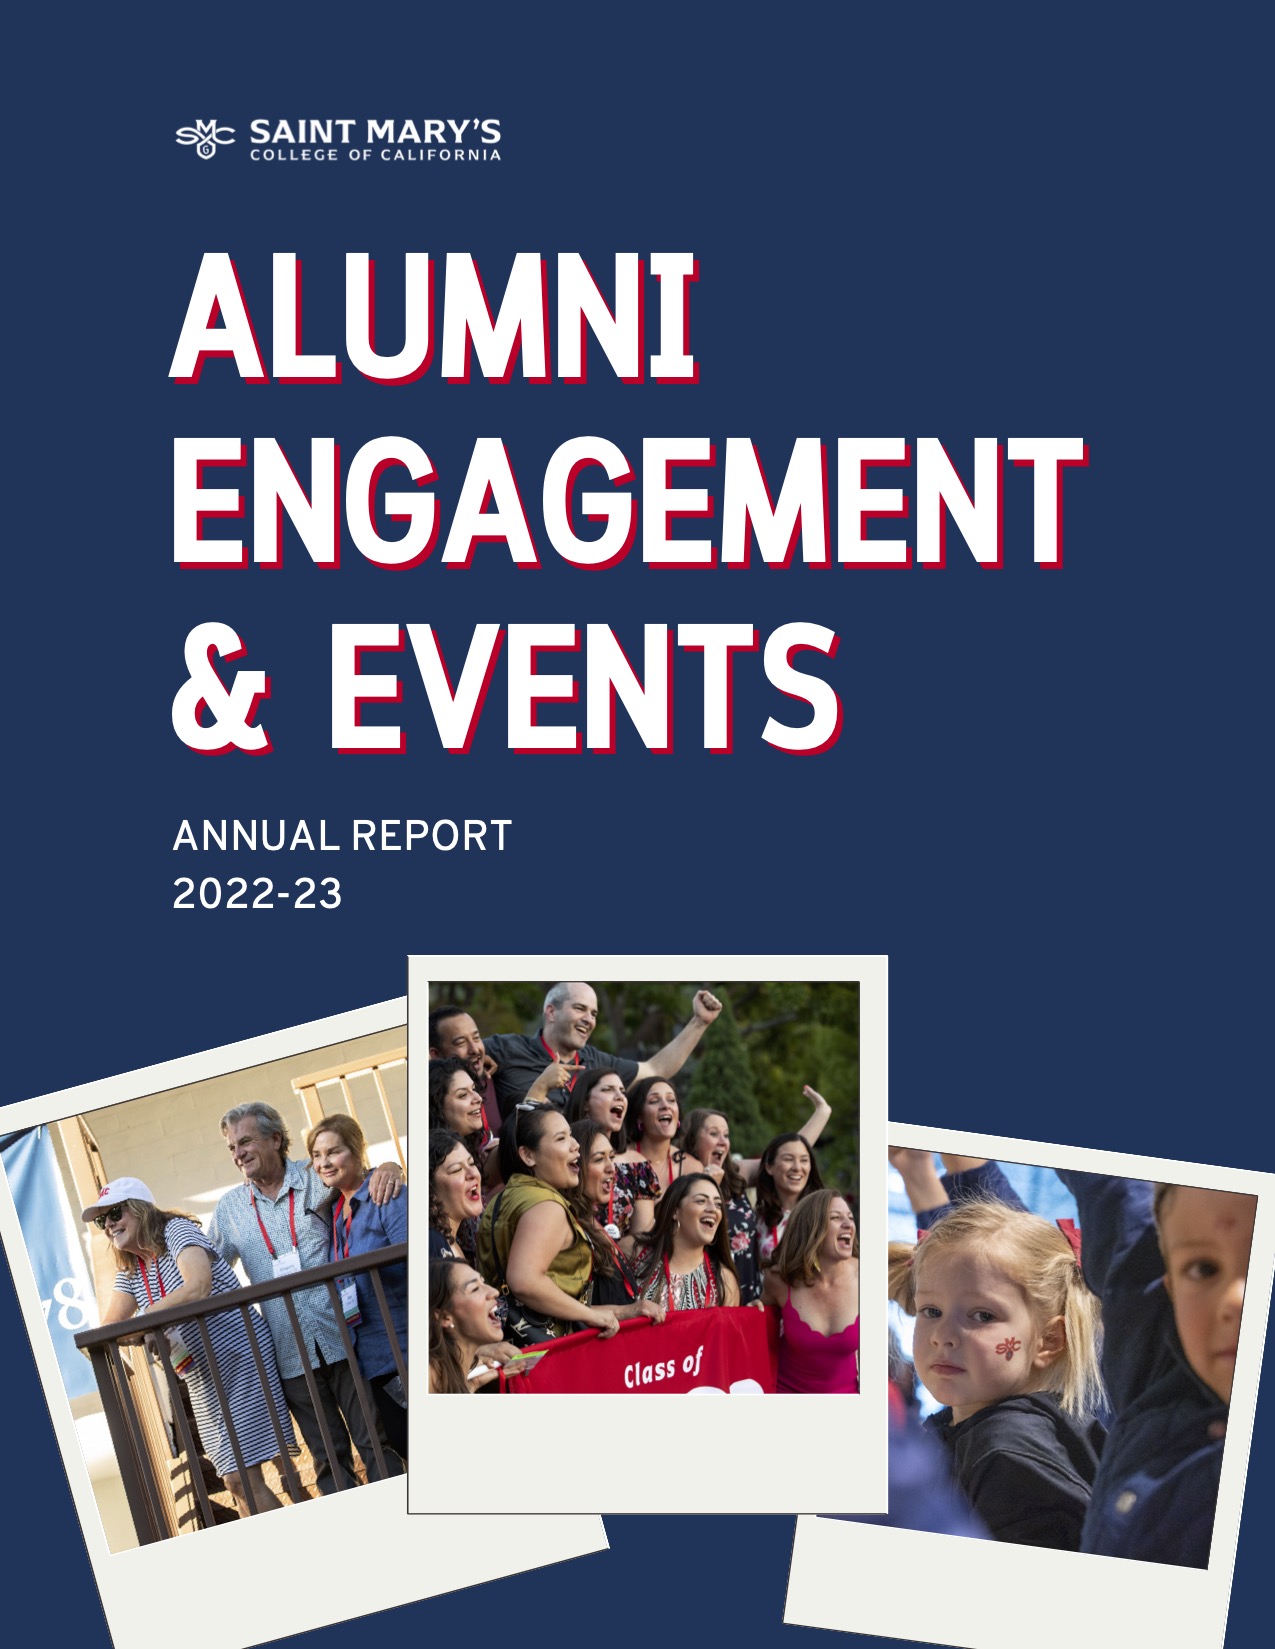 Cover of annual report: reading &quot;Alumni Engagement &amp; Events: Annual Report 2022-23&quot; with three photos of alumni and children